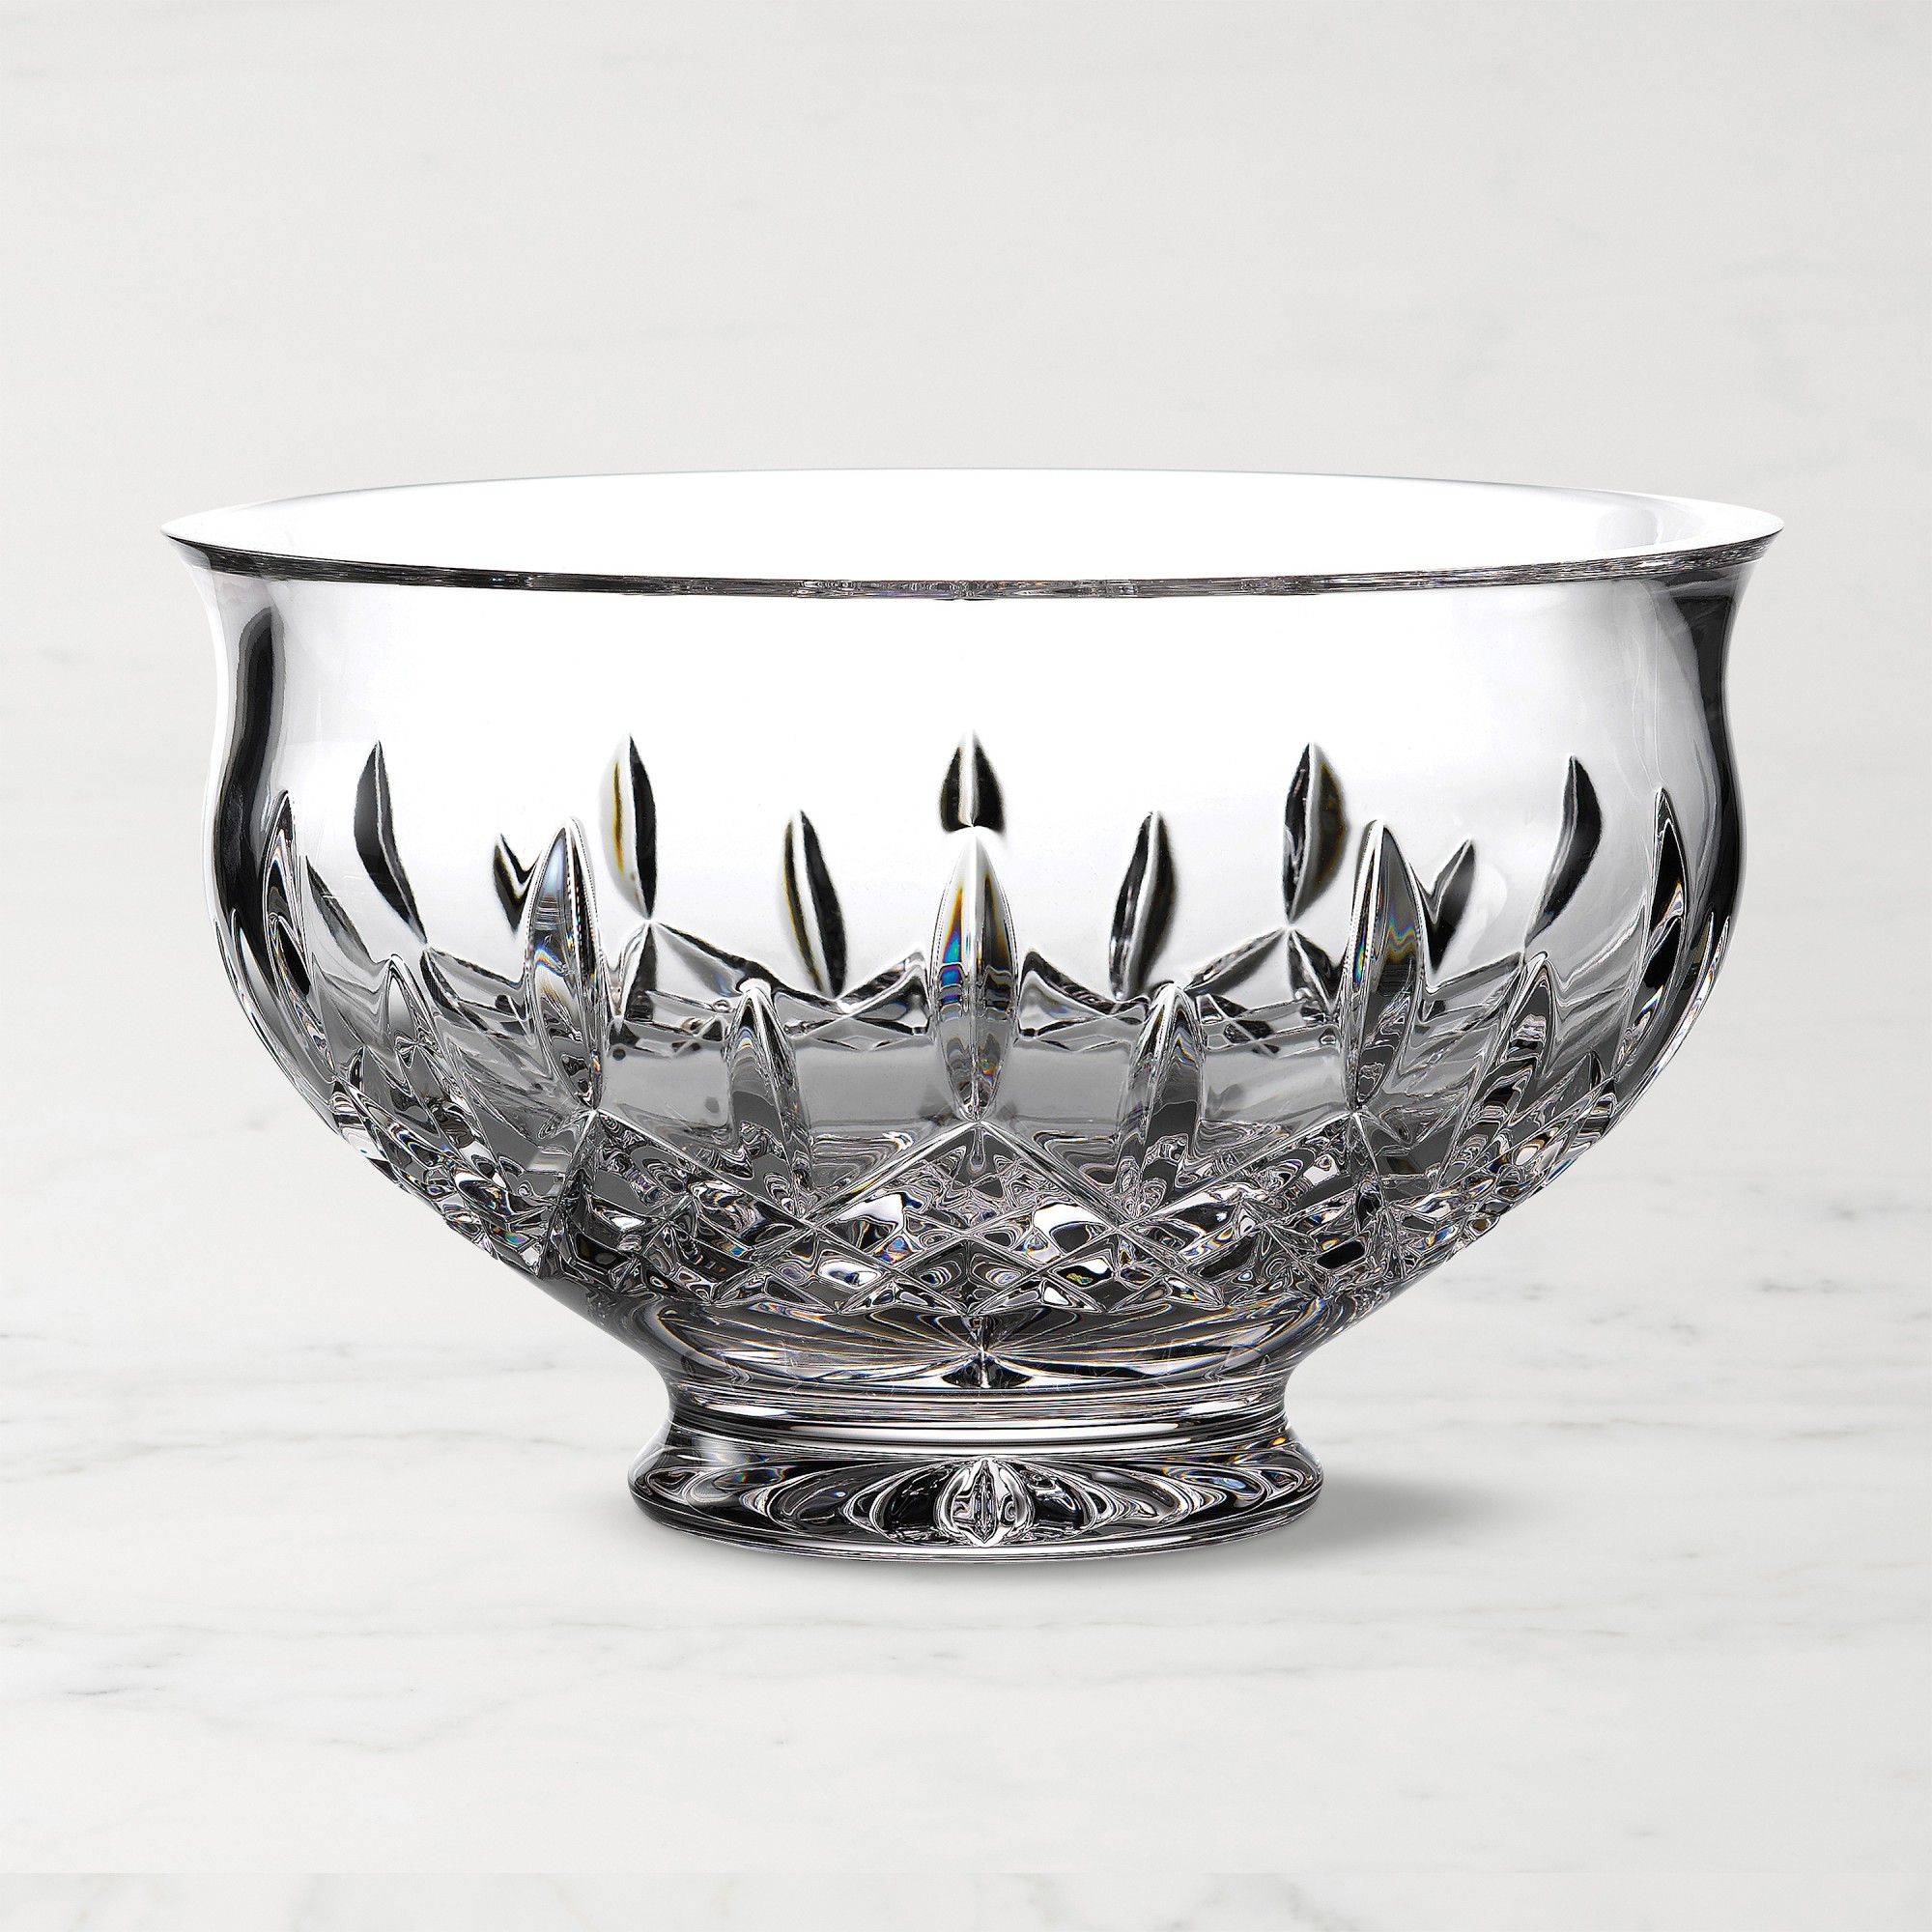 Waterford Lismore Footed Bowl, 11"